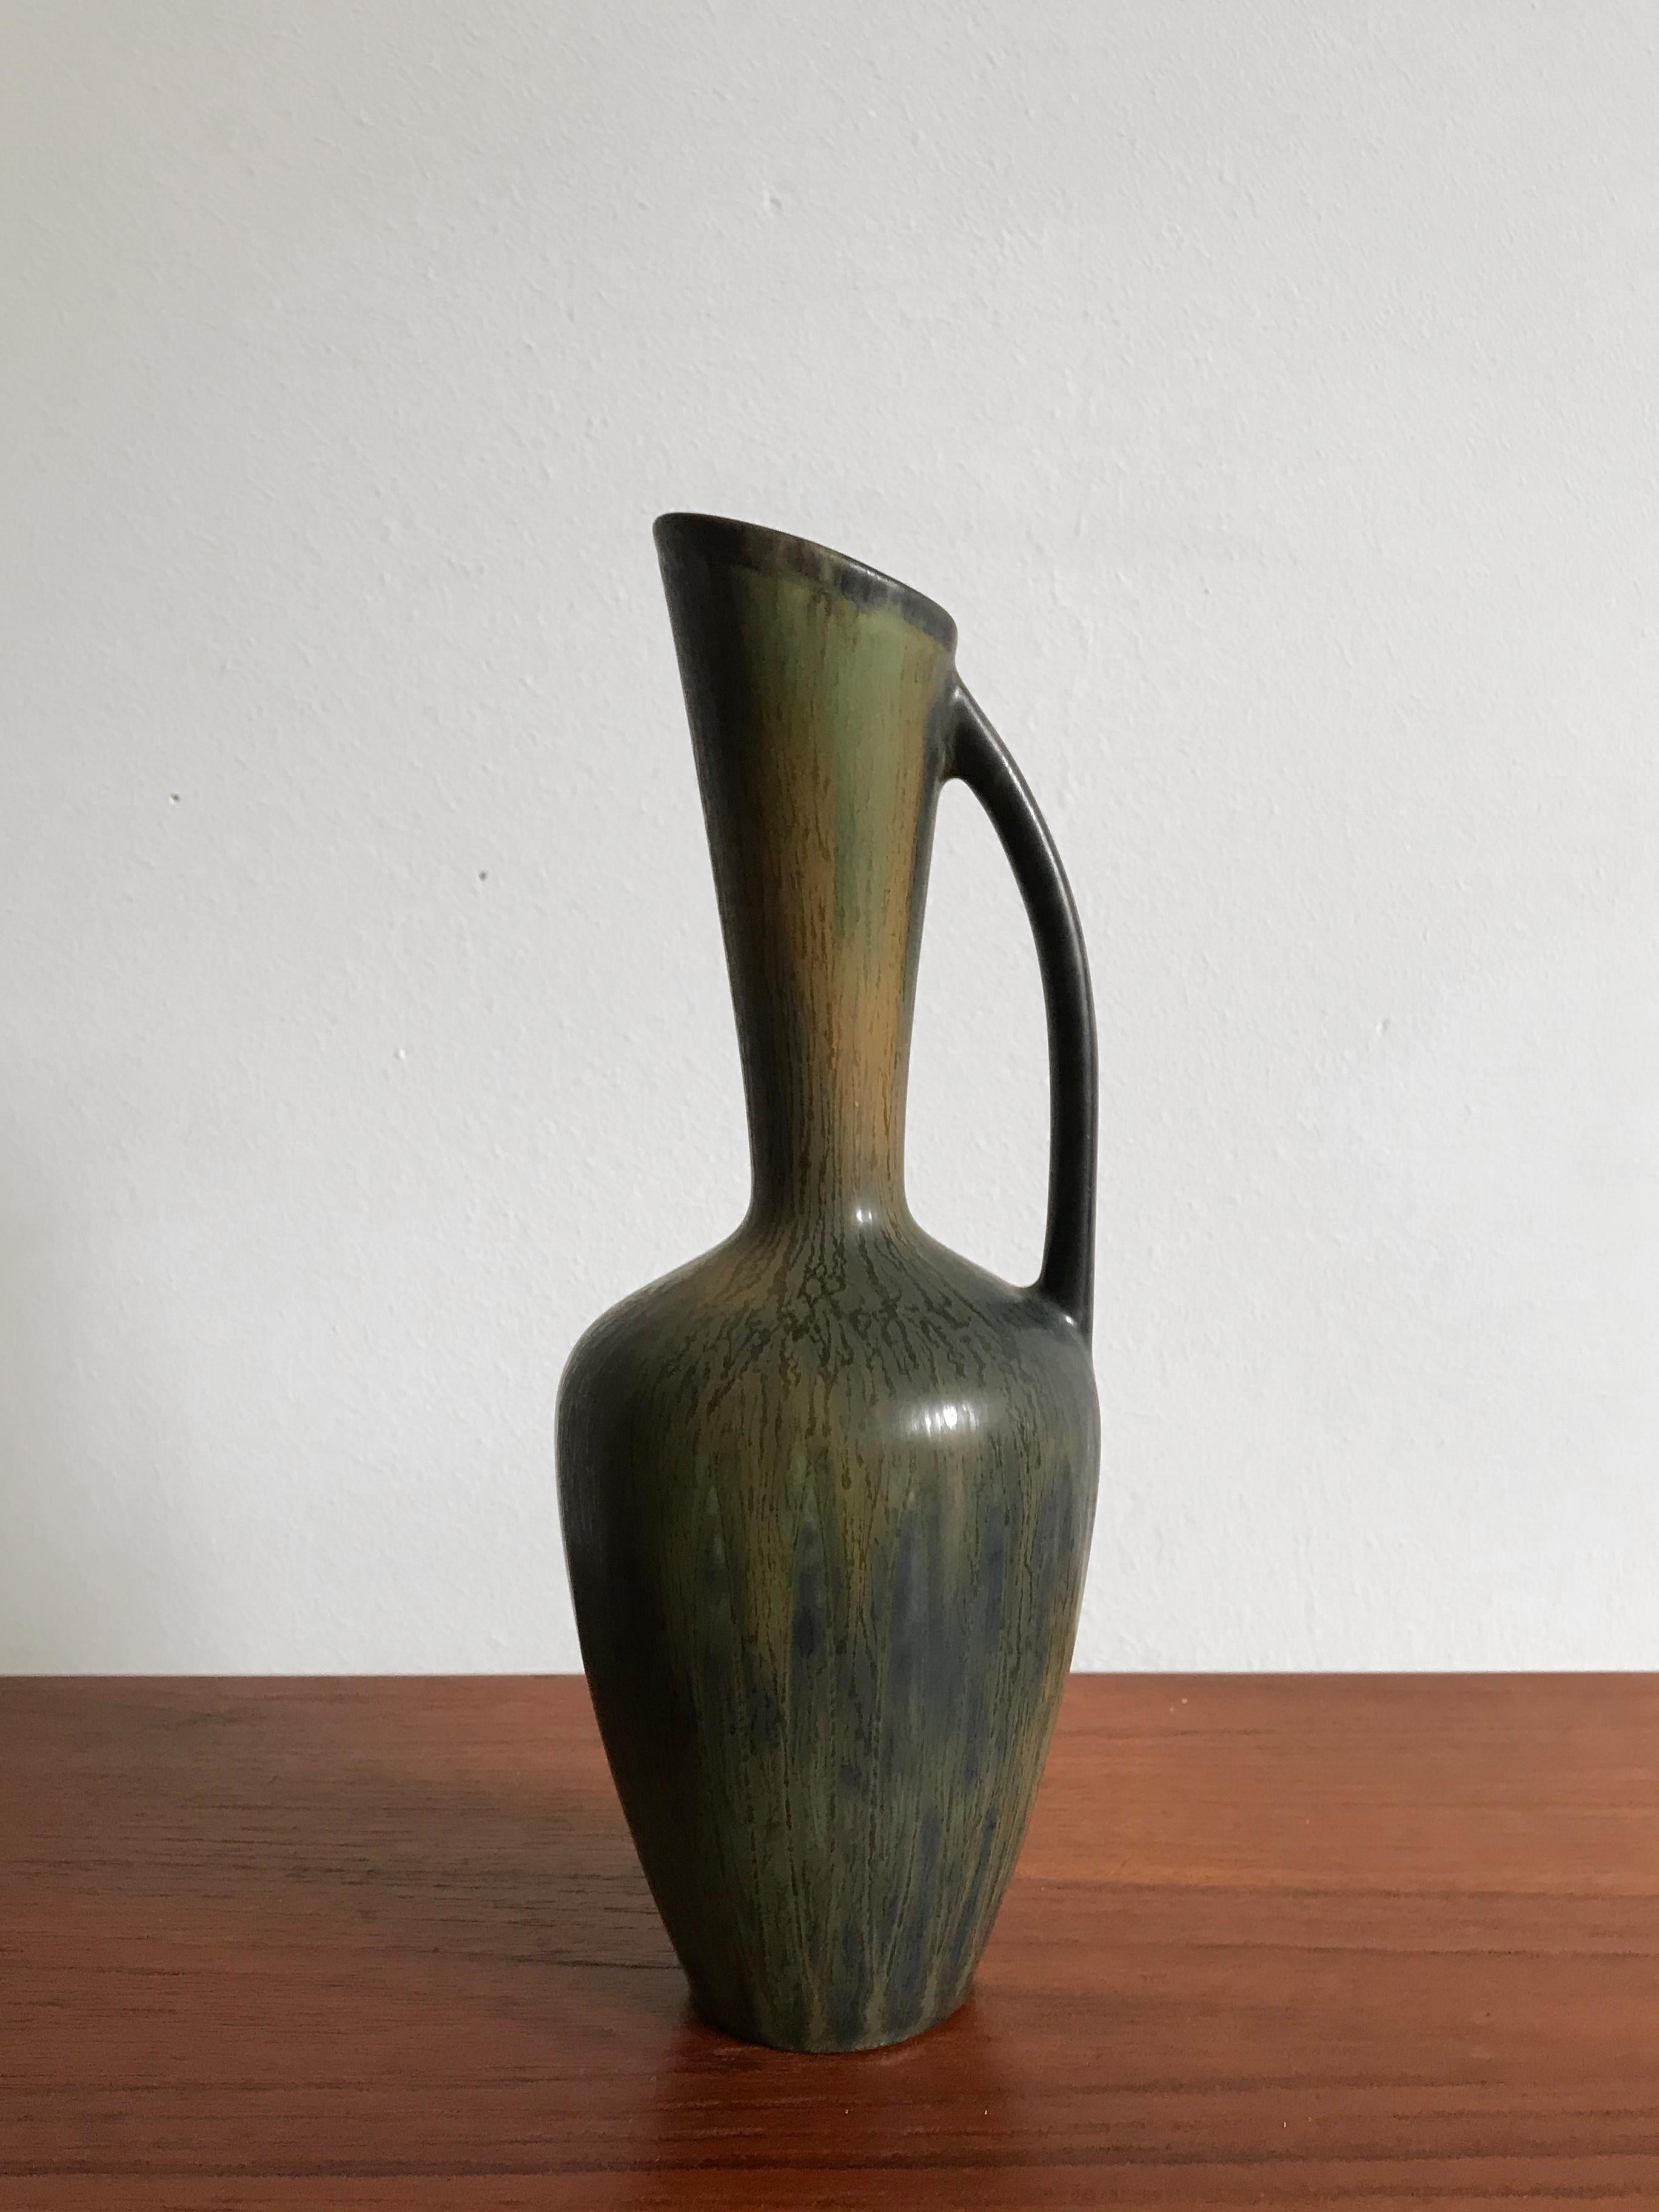 1950s beautiful Scandinavian stoneware jugs or vase in matt enamel designed by Gunnar Nylund for Rörstrand, made in Sweden, marked on the bottom.